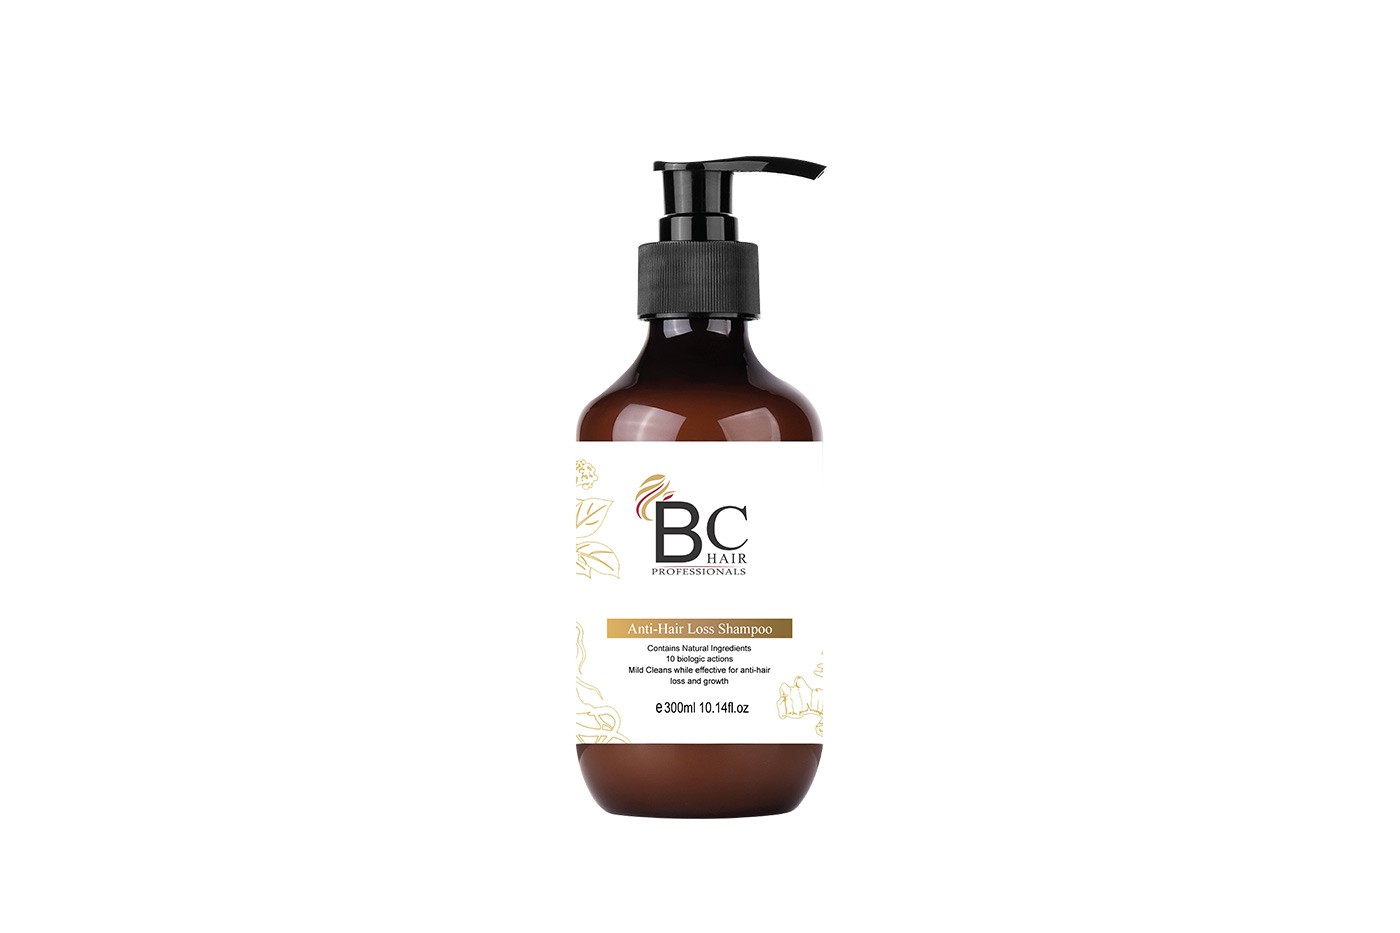 Prevent hair breakage with BC Hair Professionals Shampoo